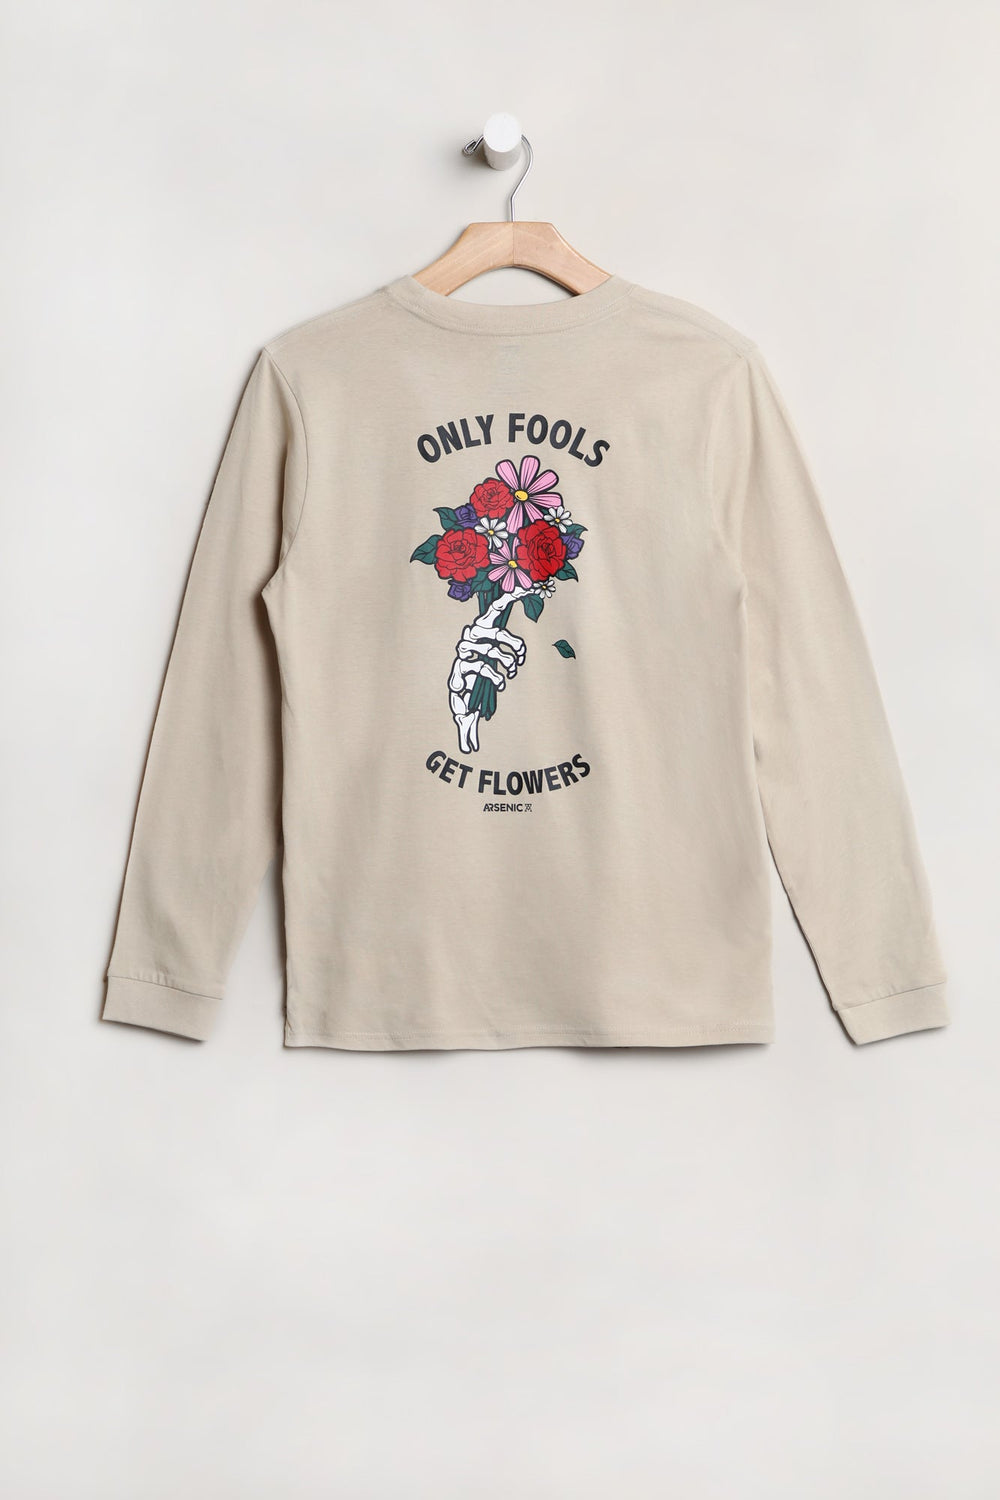 Arsenic Youth Only Fools Get Flowers Long Sleeve Top Arsenic Youth Only Fools Get Flowers Long Sleeve Top